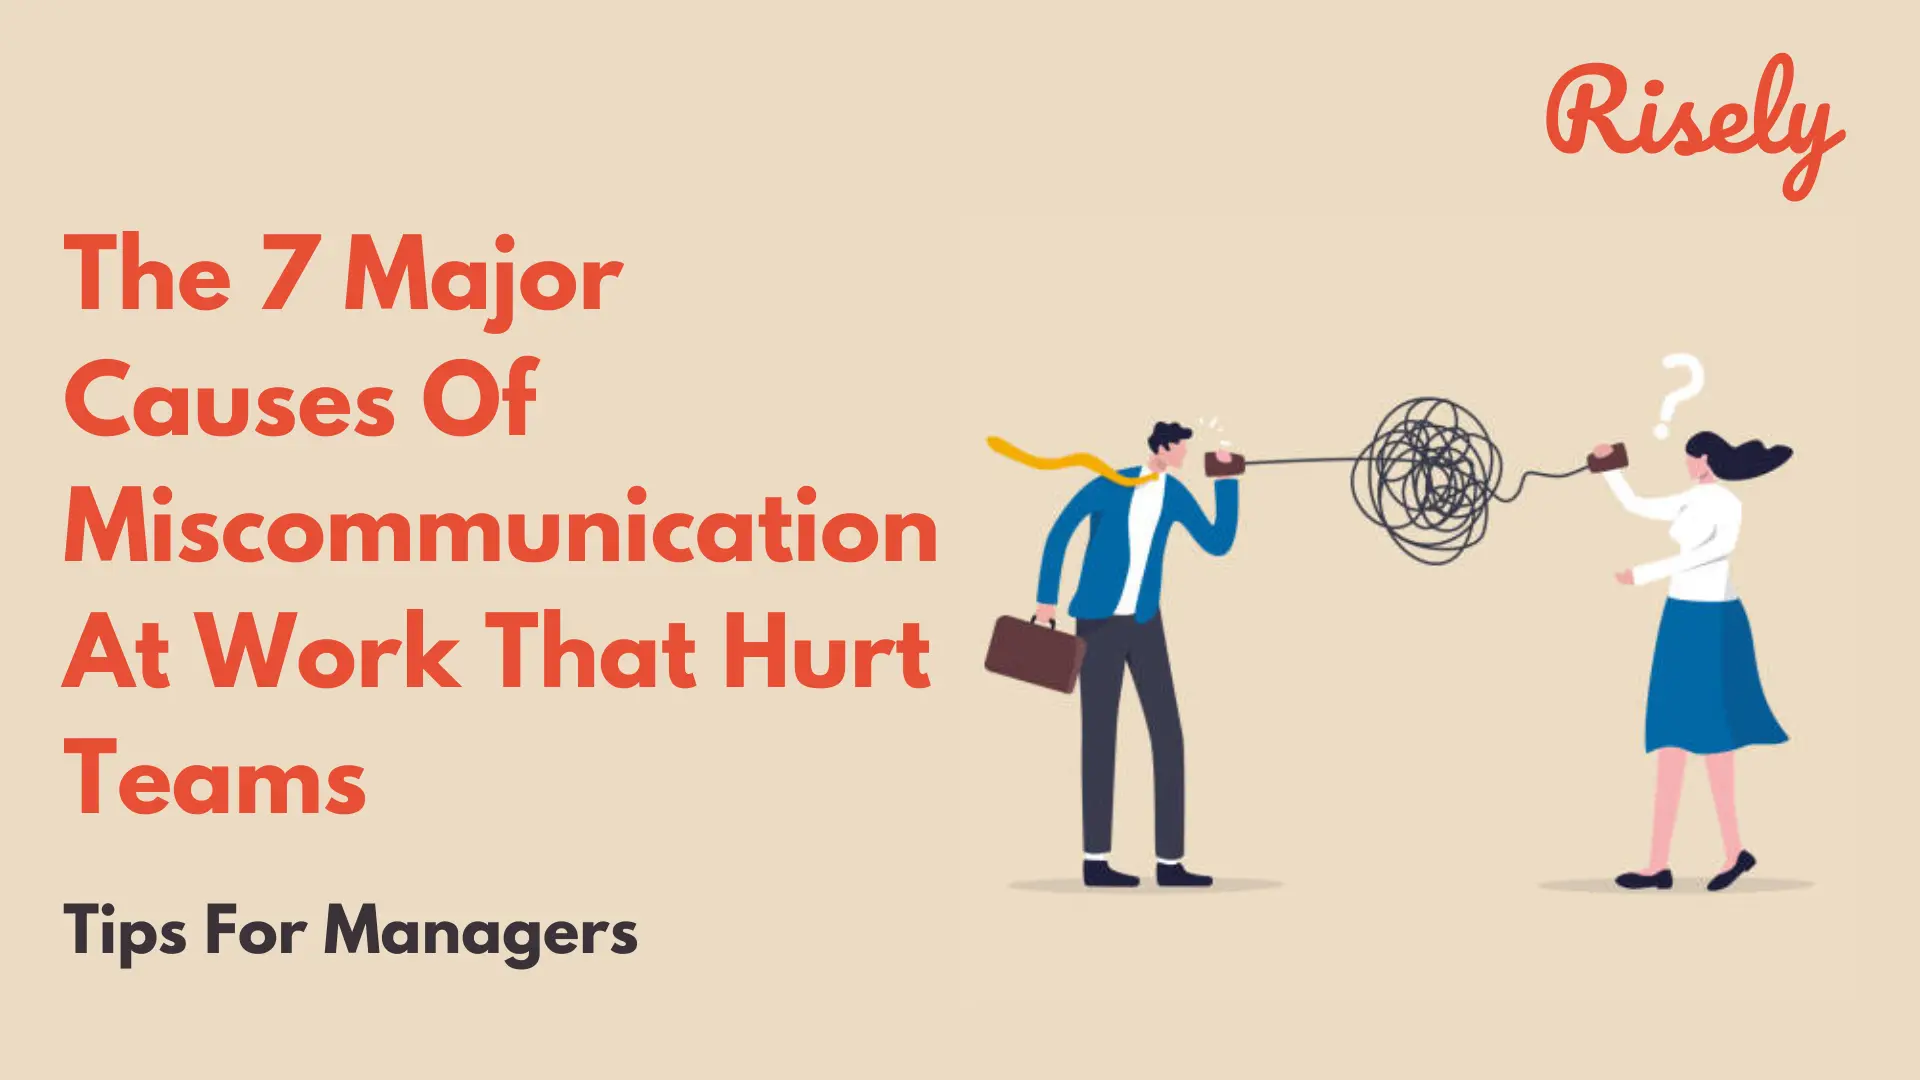 The 7 Major Causes Of Miscommunication At Work That Hurt Teams